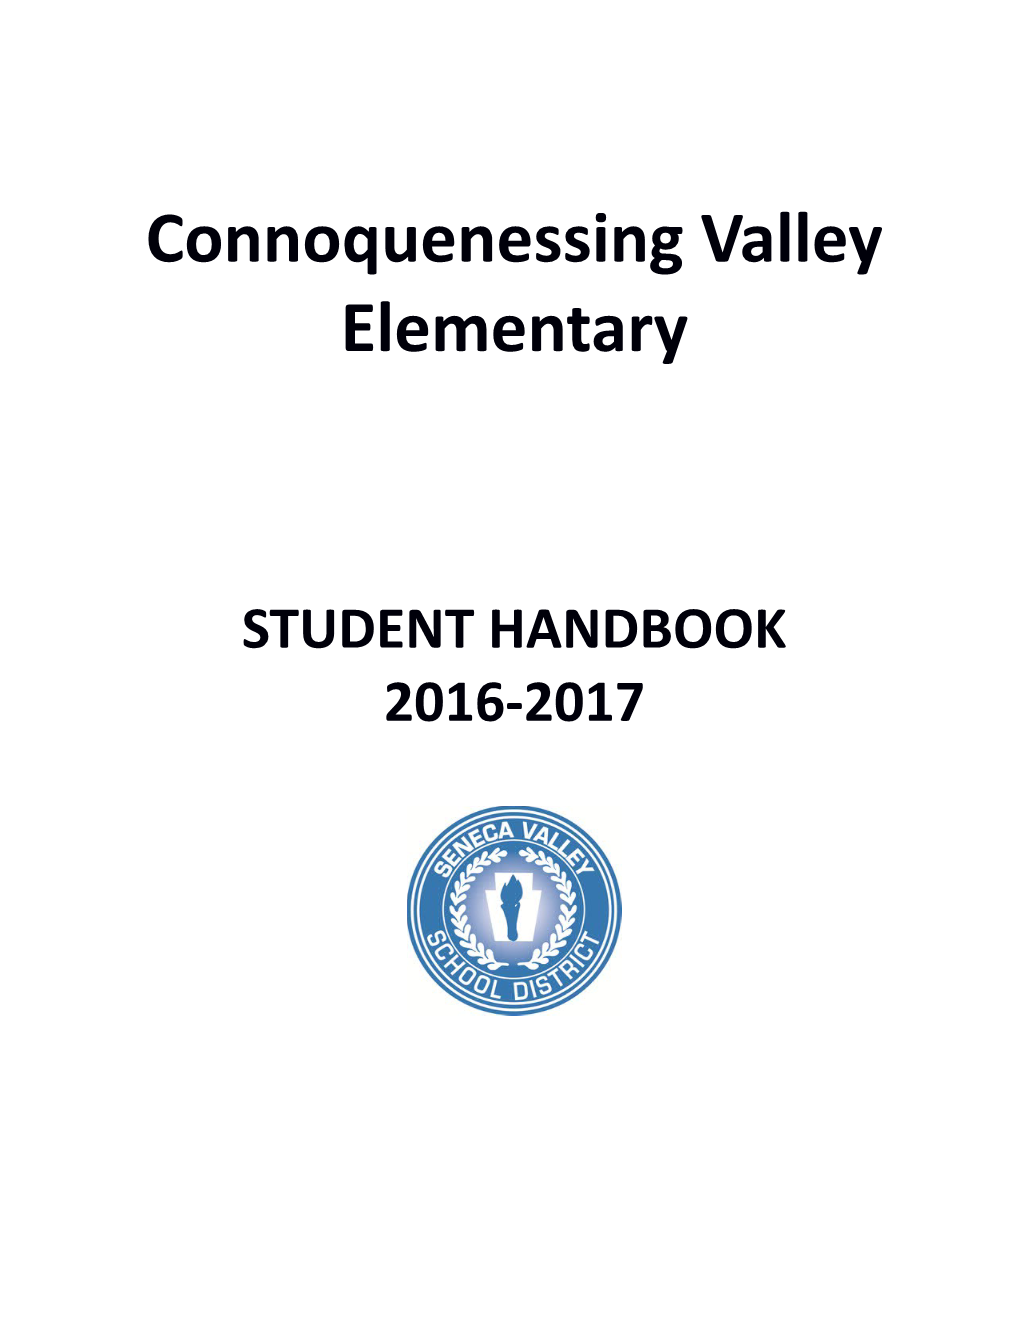 Connoquenessing Valley Elementary